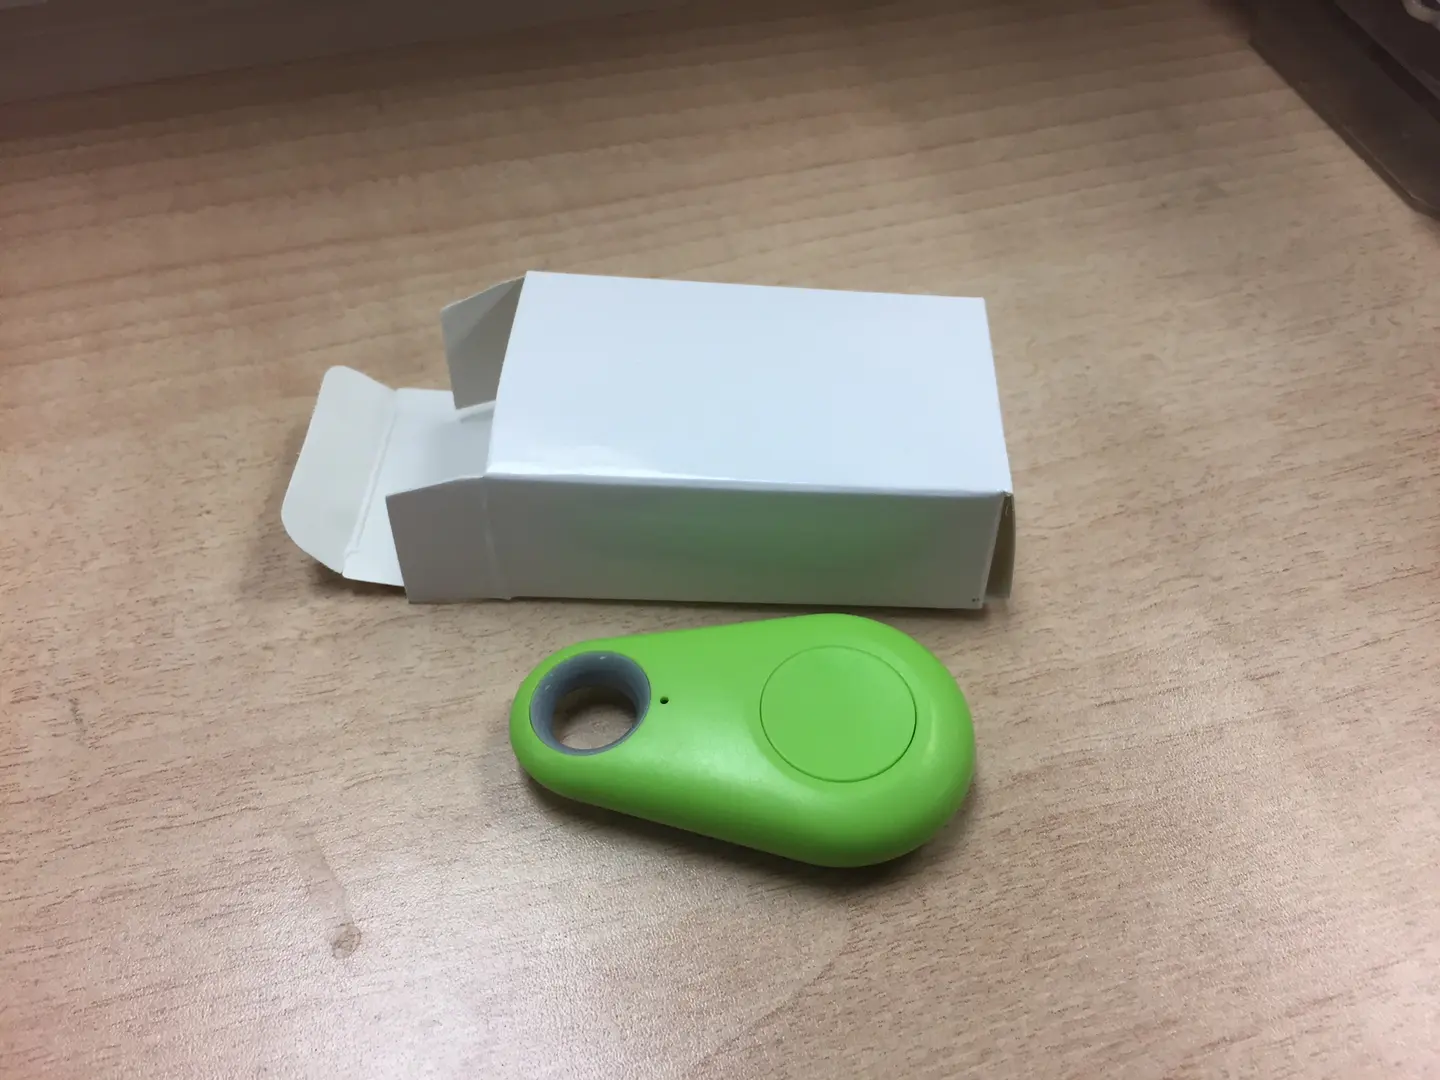 A green color key finder along with a box